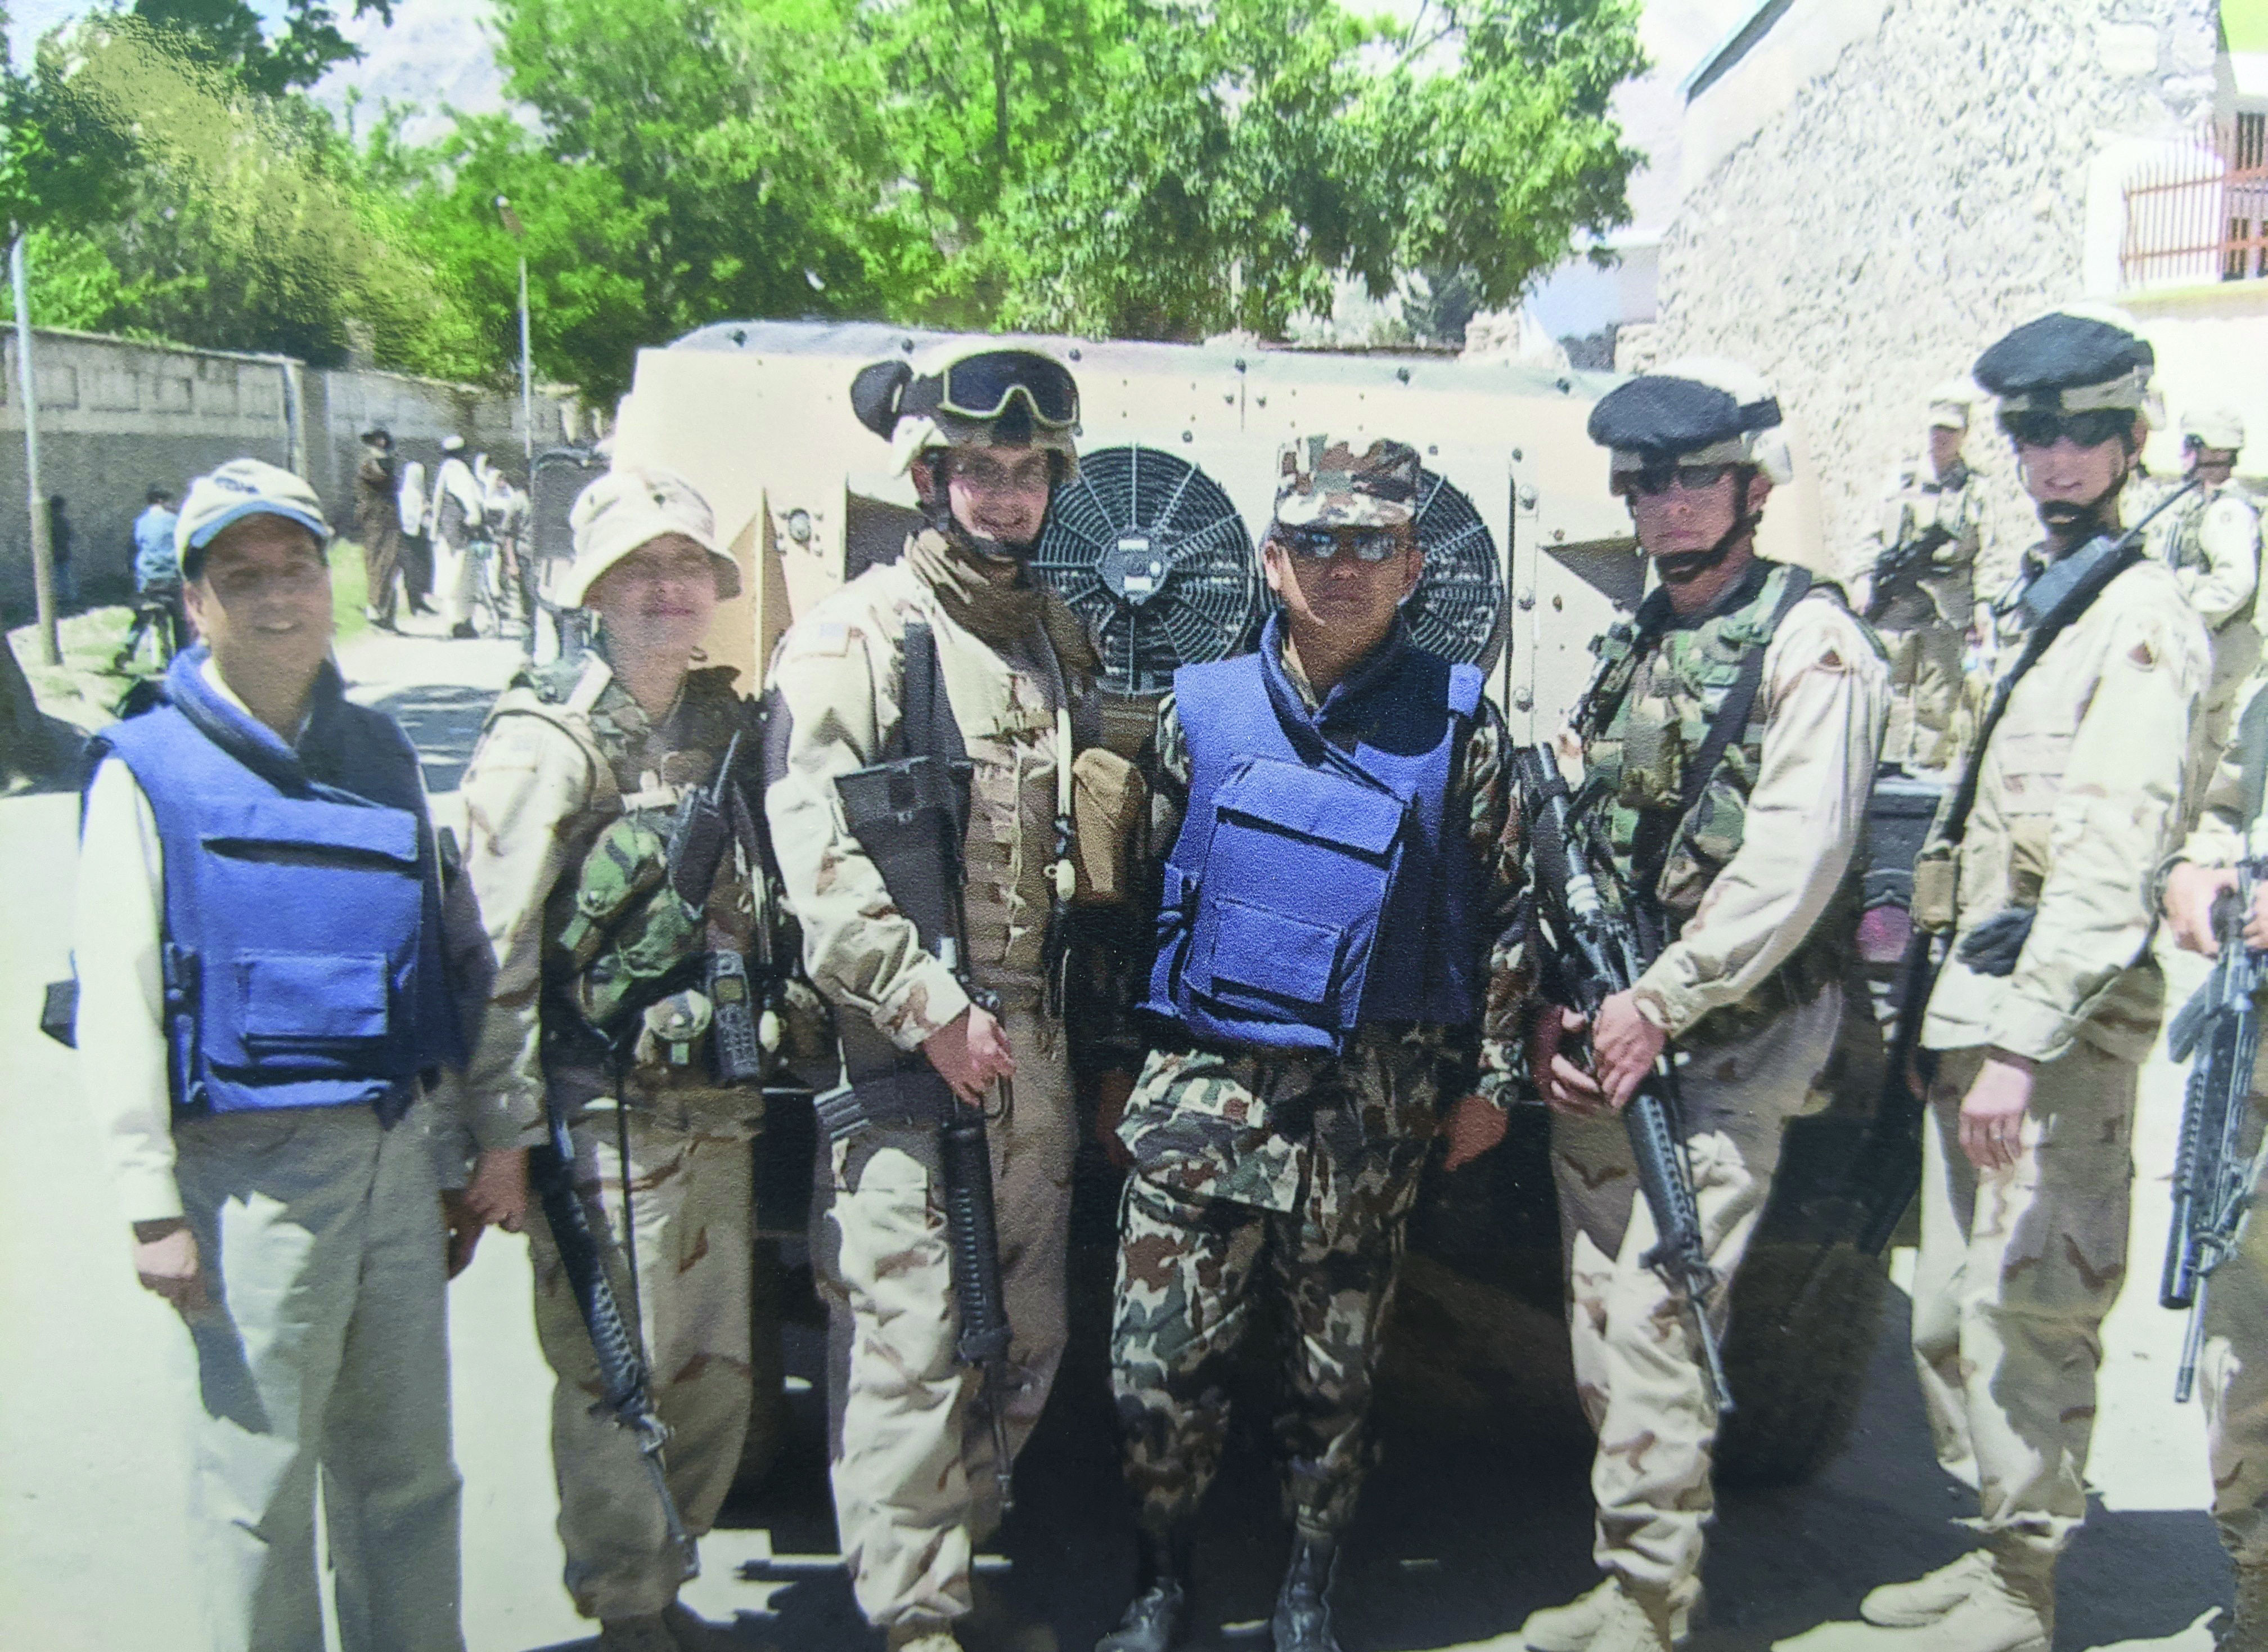 Members of 44th Signal Battalion, Mannheim,
        Germany, escort General Limbu from Nepal who
        was observing the U.S. humanitarian mission
        activities in local villages and schools in Parwan
        Province. Pictured left to right: unknown, SPC
        Elizabeth Navarro, SPC Tim Beckwith, General
        Limbu from Nepal, SPC Coty McCartney, SPC Adam
        Richardson, CPL Sergey Batyrshin. (Photo courtesy
        of SFC Beckwith)